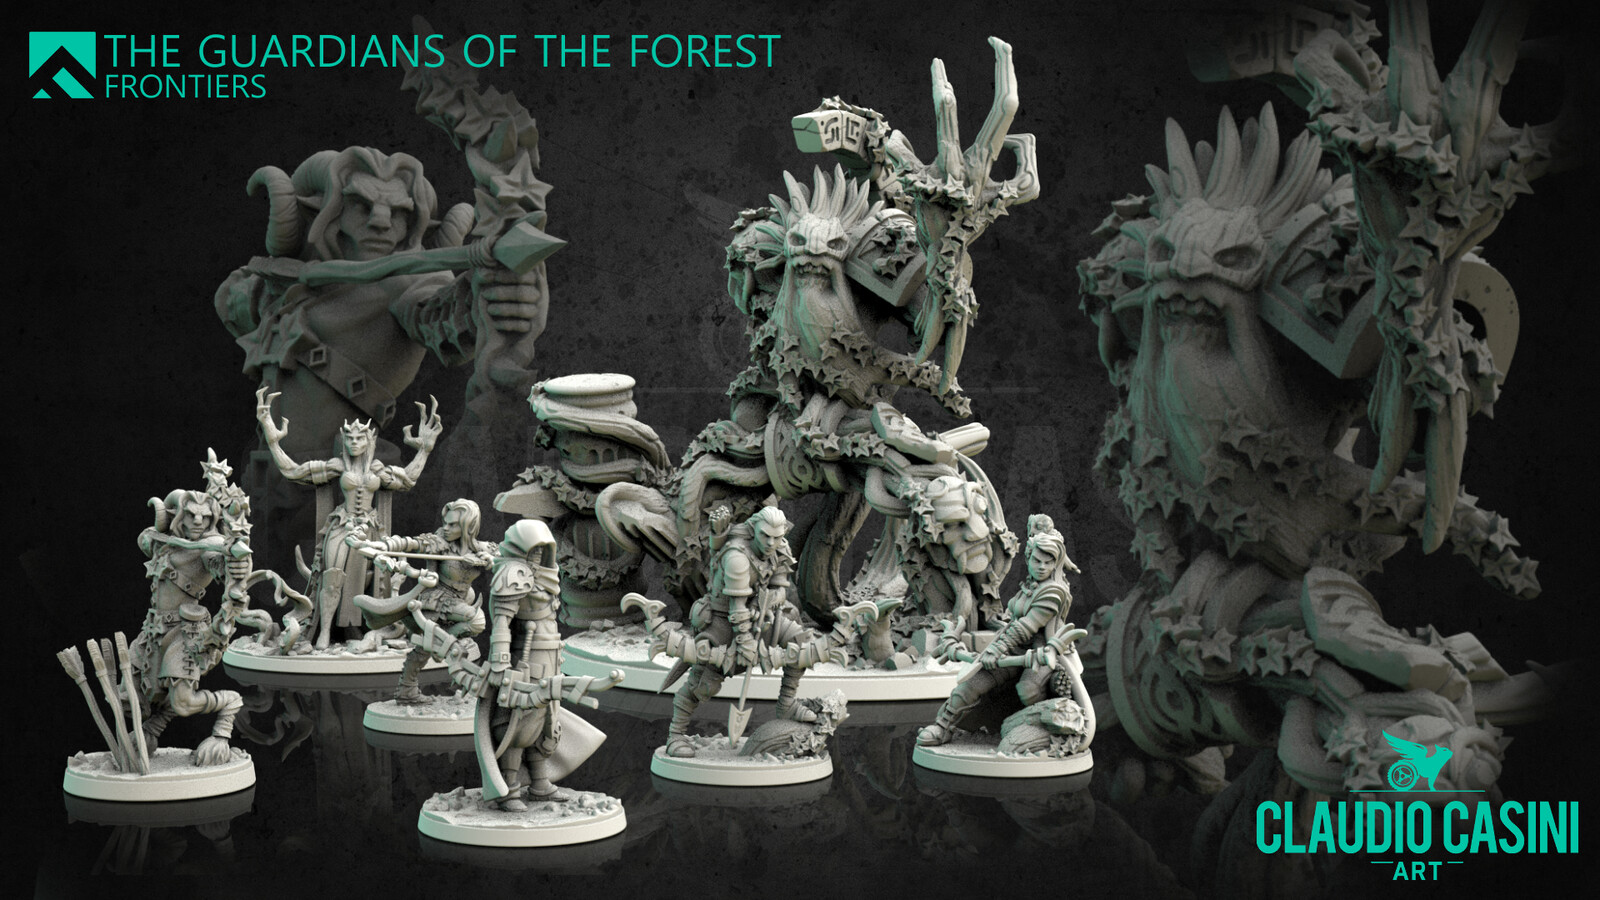 The Guardians of the Forest